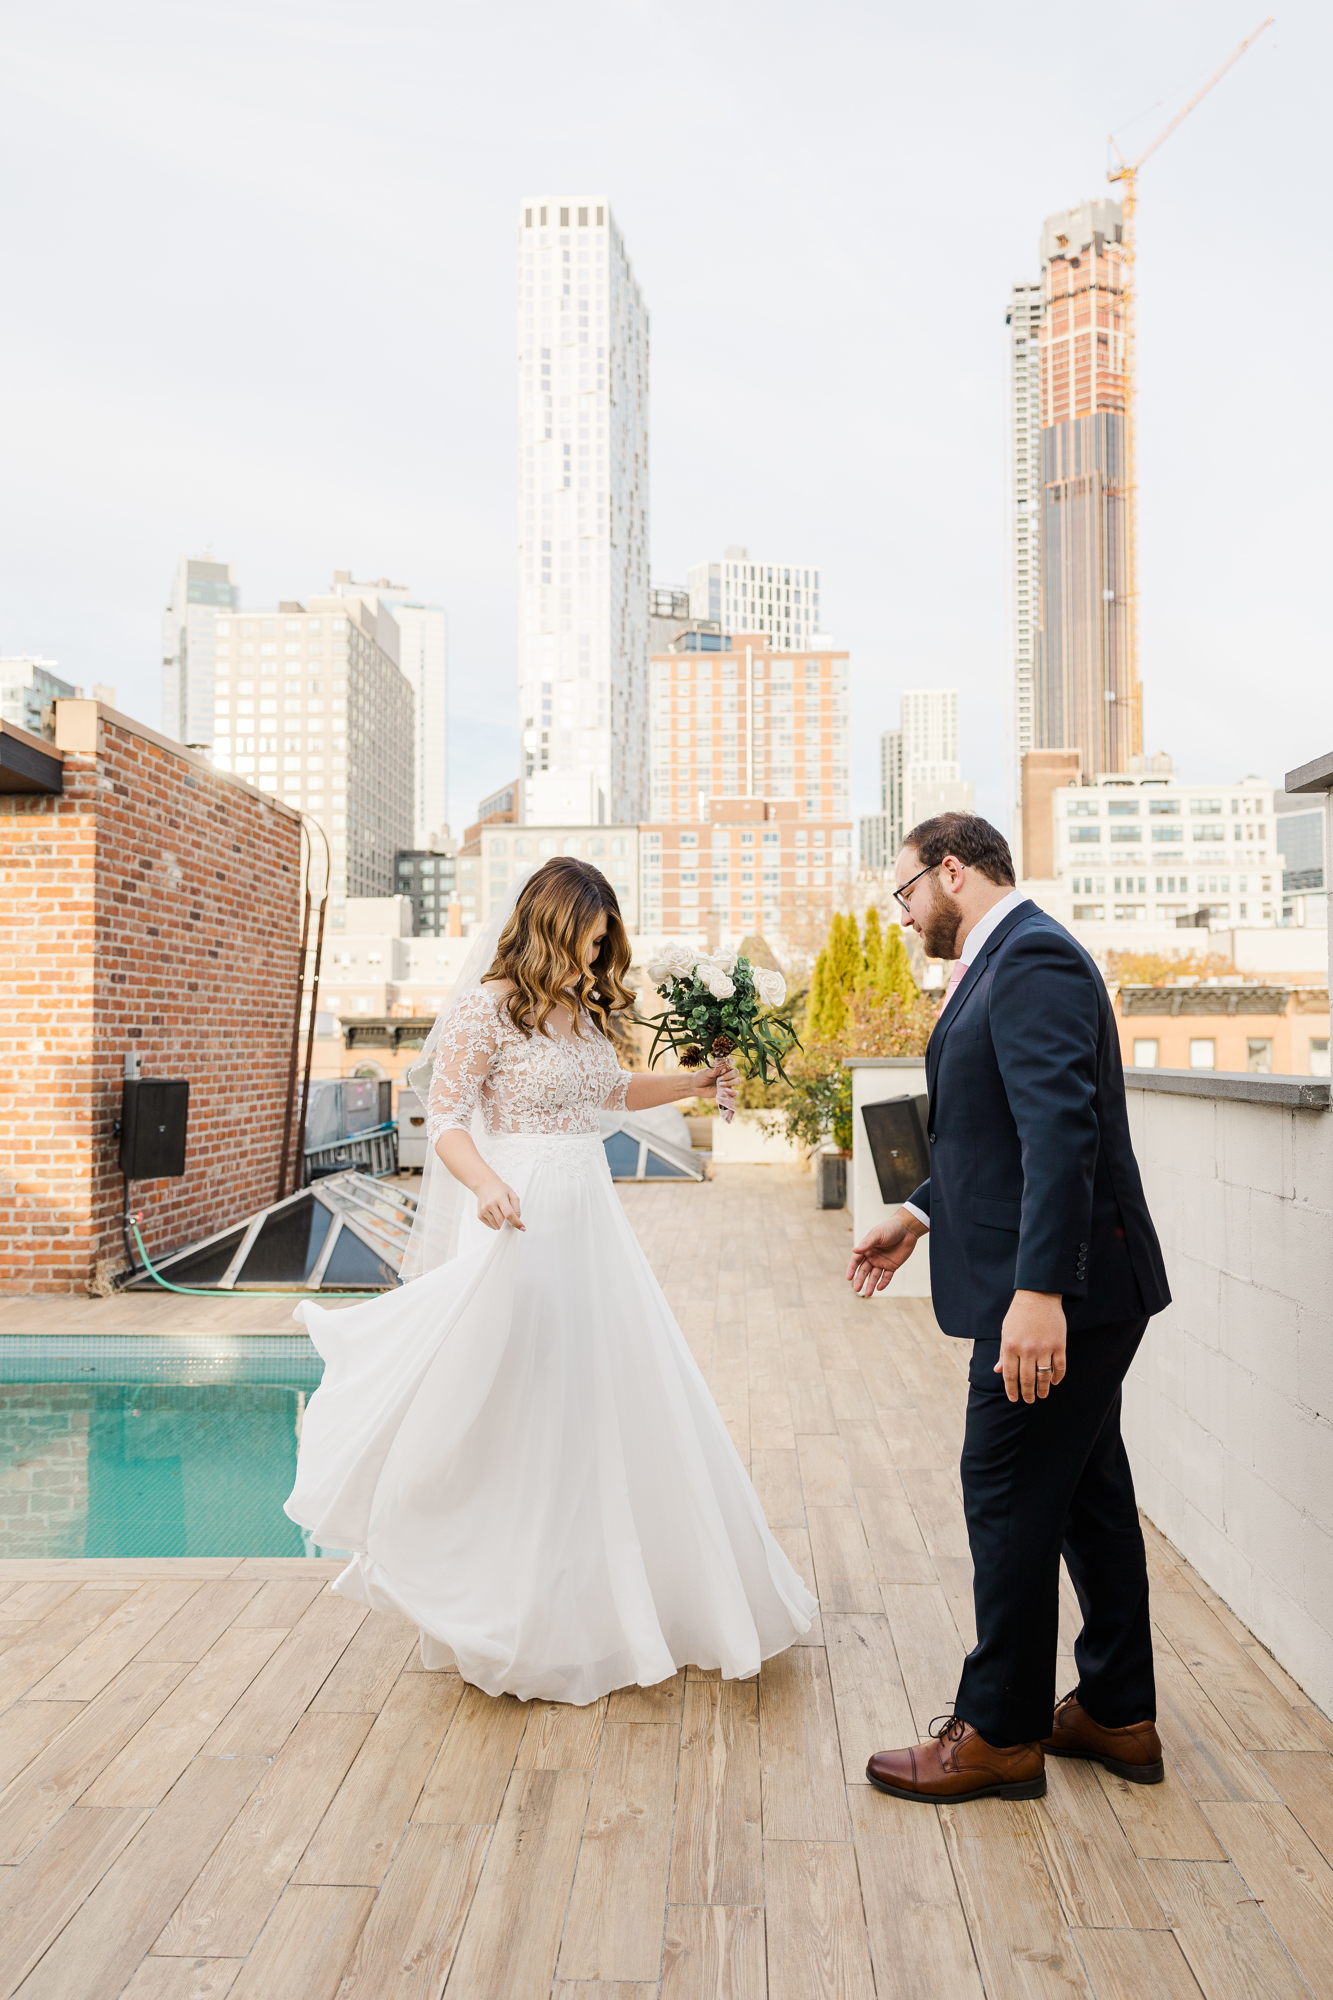 Picturesque Wintery Brooklyn Wedding Photography at Deity